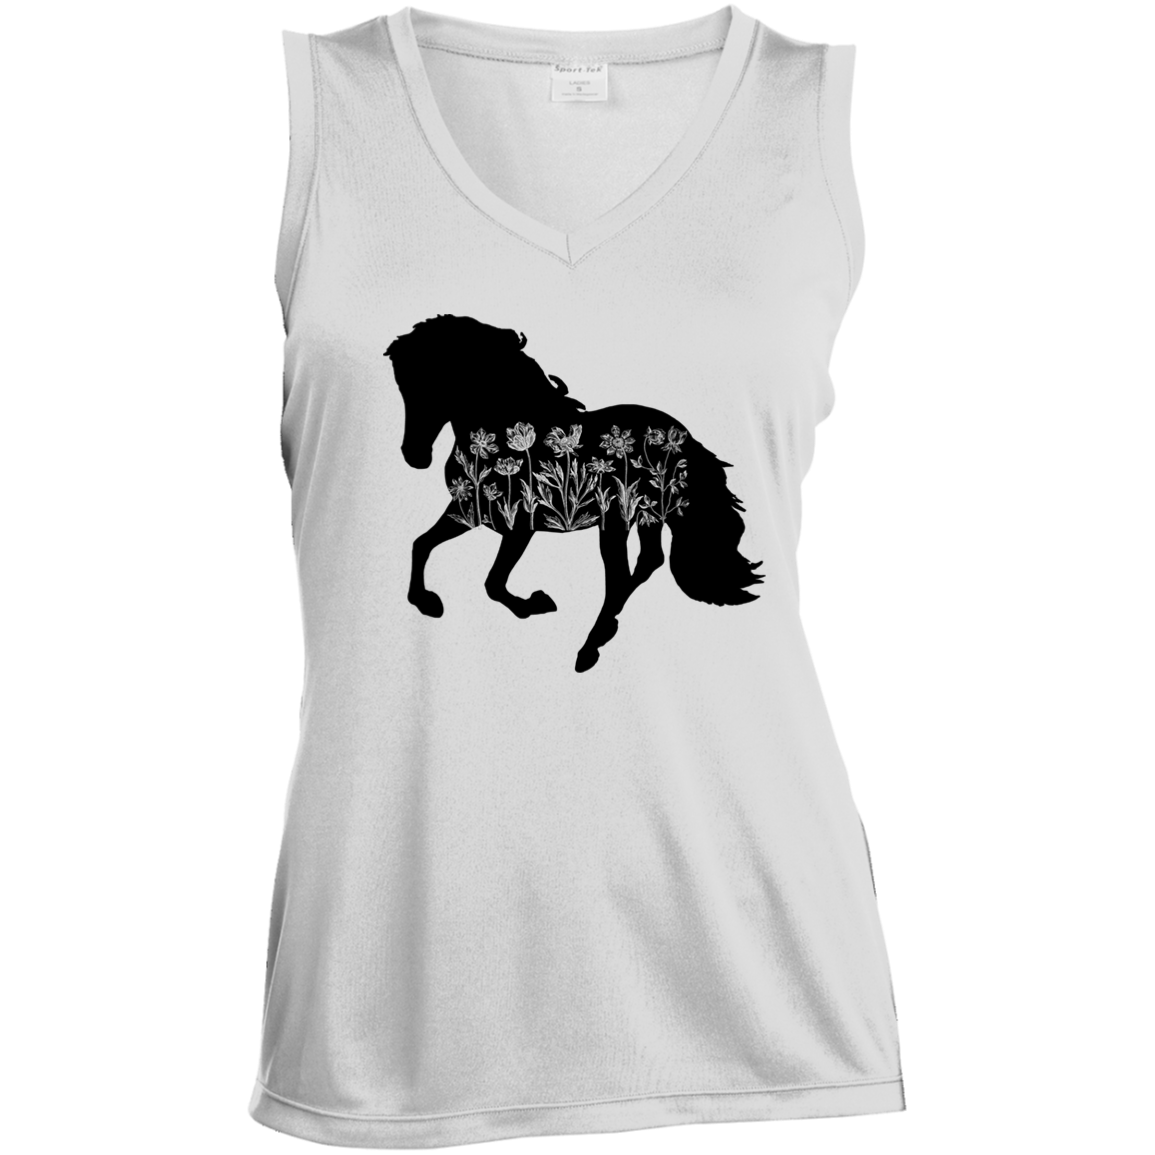 Floral Print Sleeveless T-Shirt with Horse Image - MyAllOutHorses